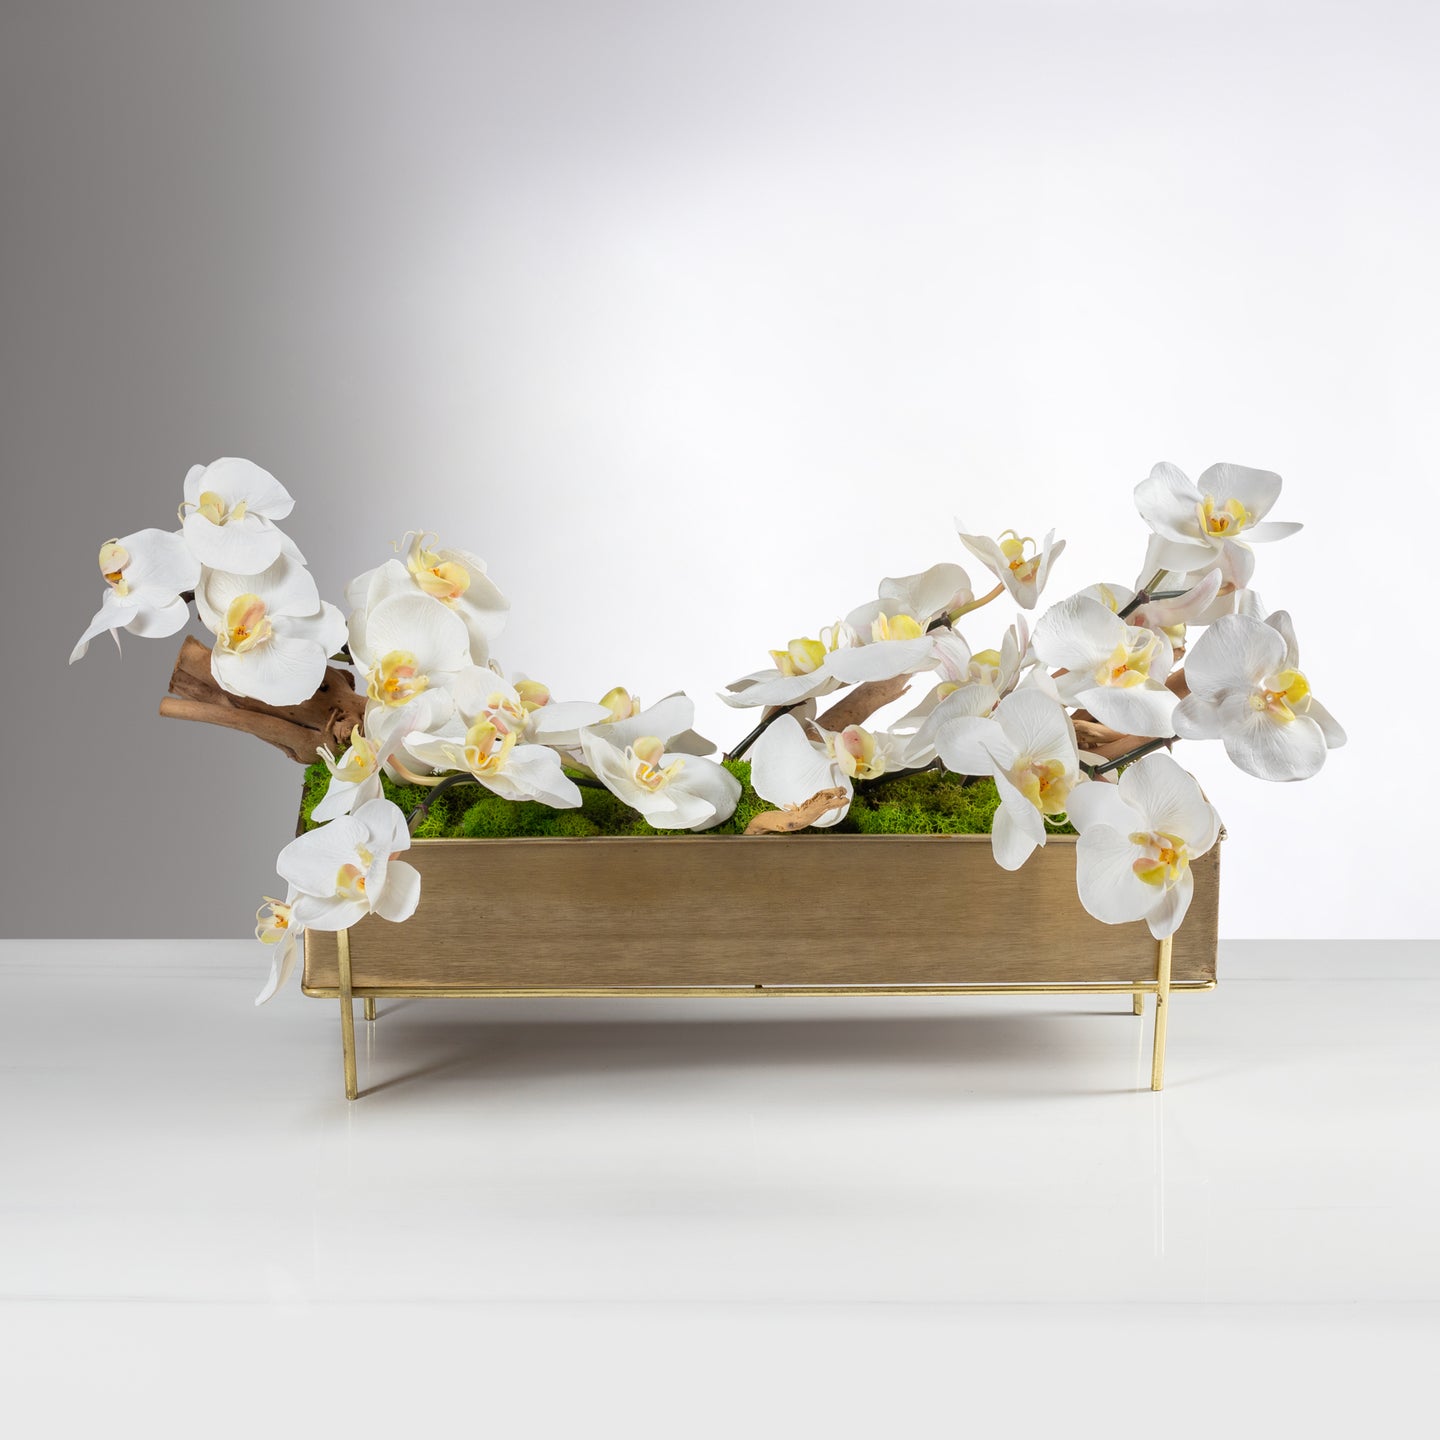 Driftwood Orchid item # 8204